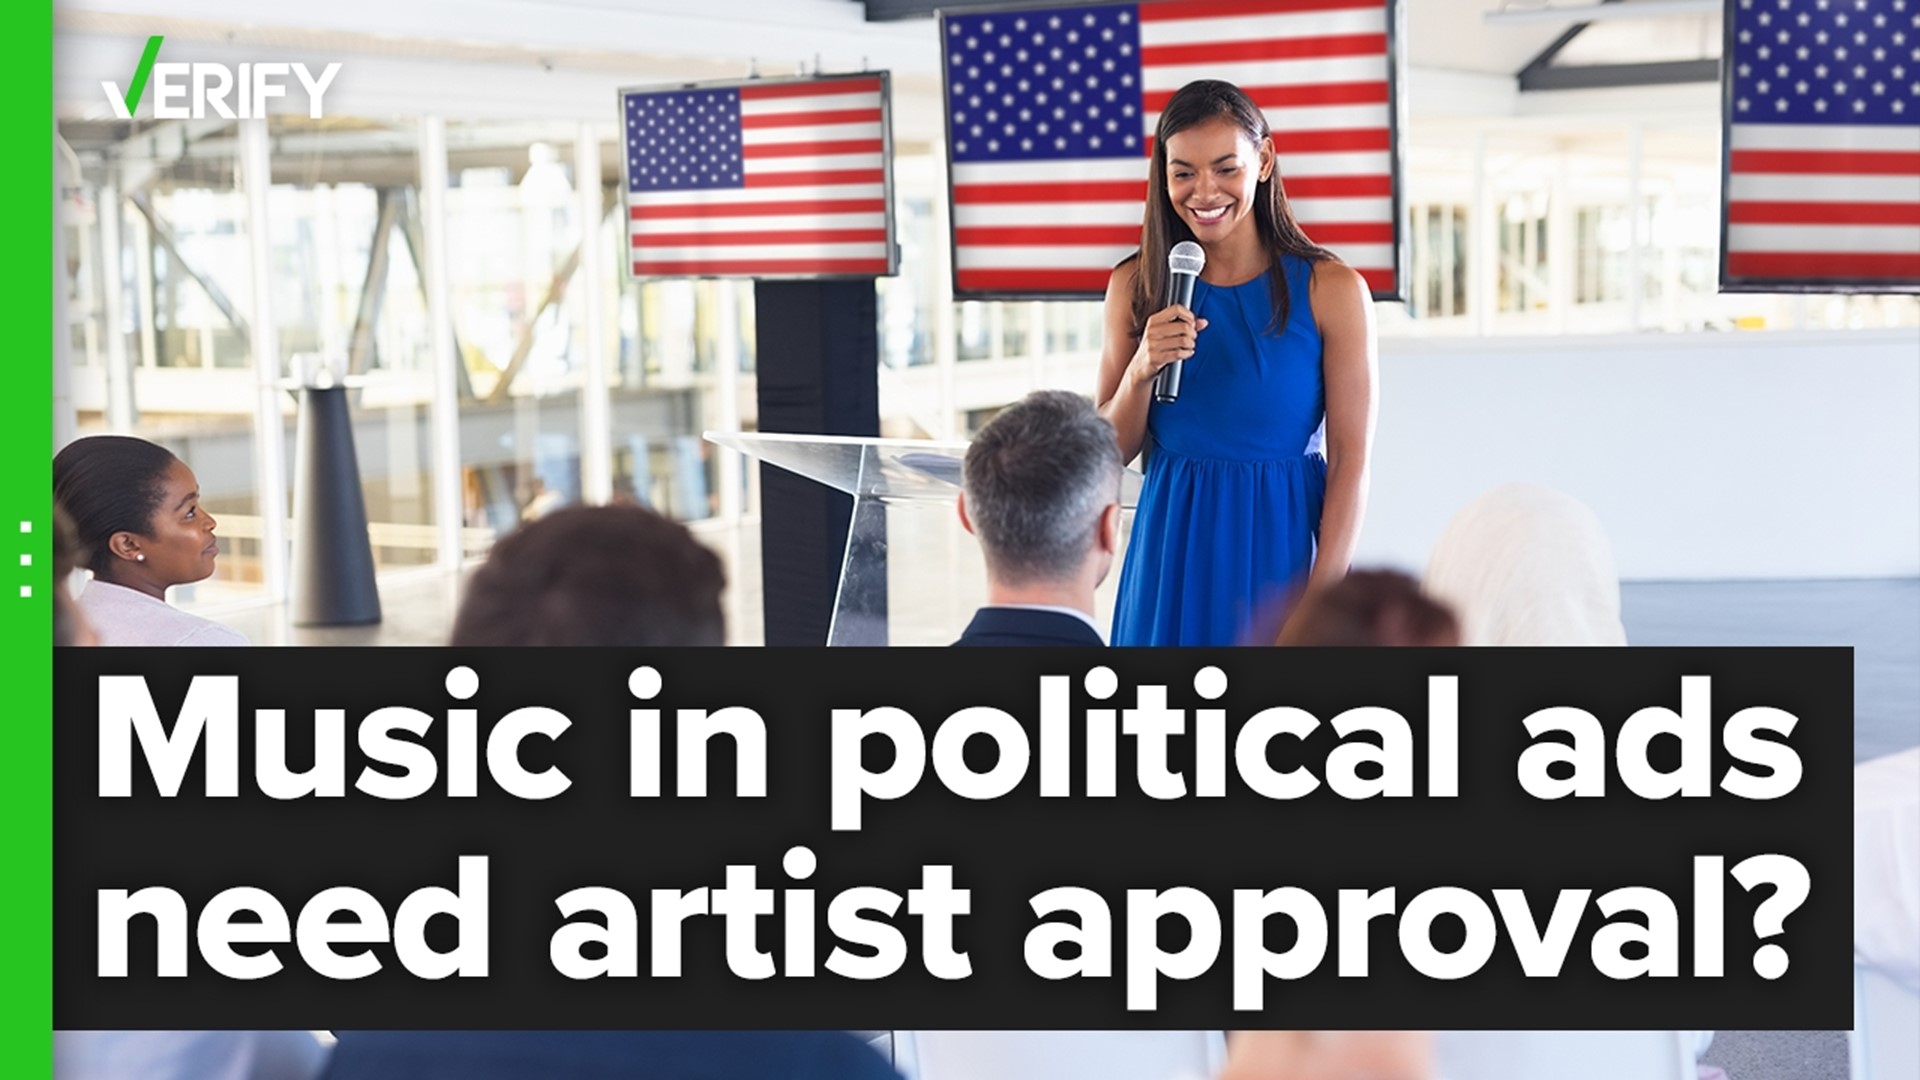 Political candidates need to purchase licenses to use copyrighted music in their TV spots. Those rights are often owned by artists, but not always.